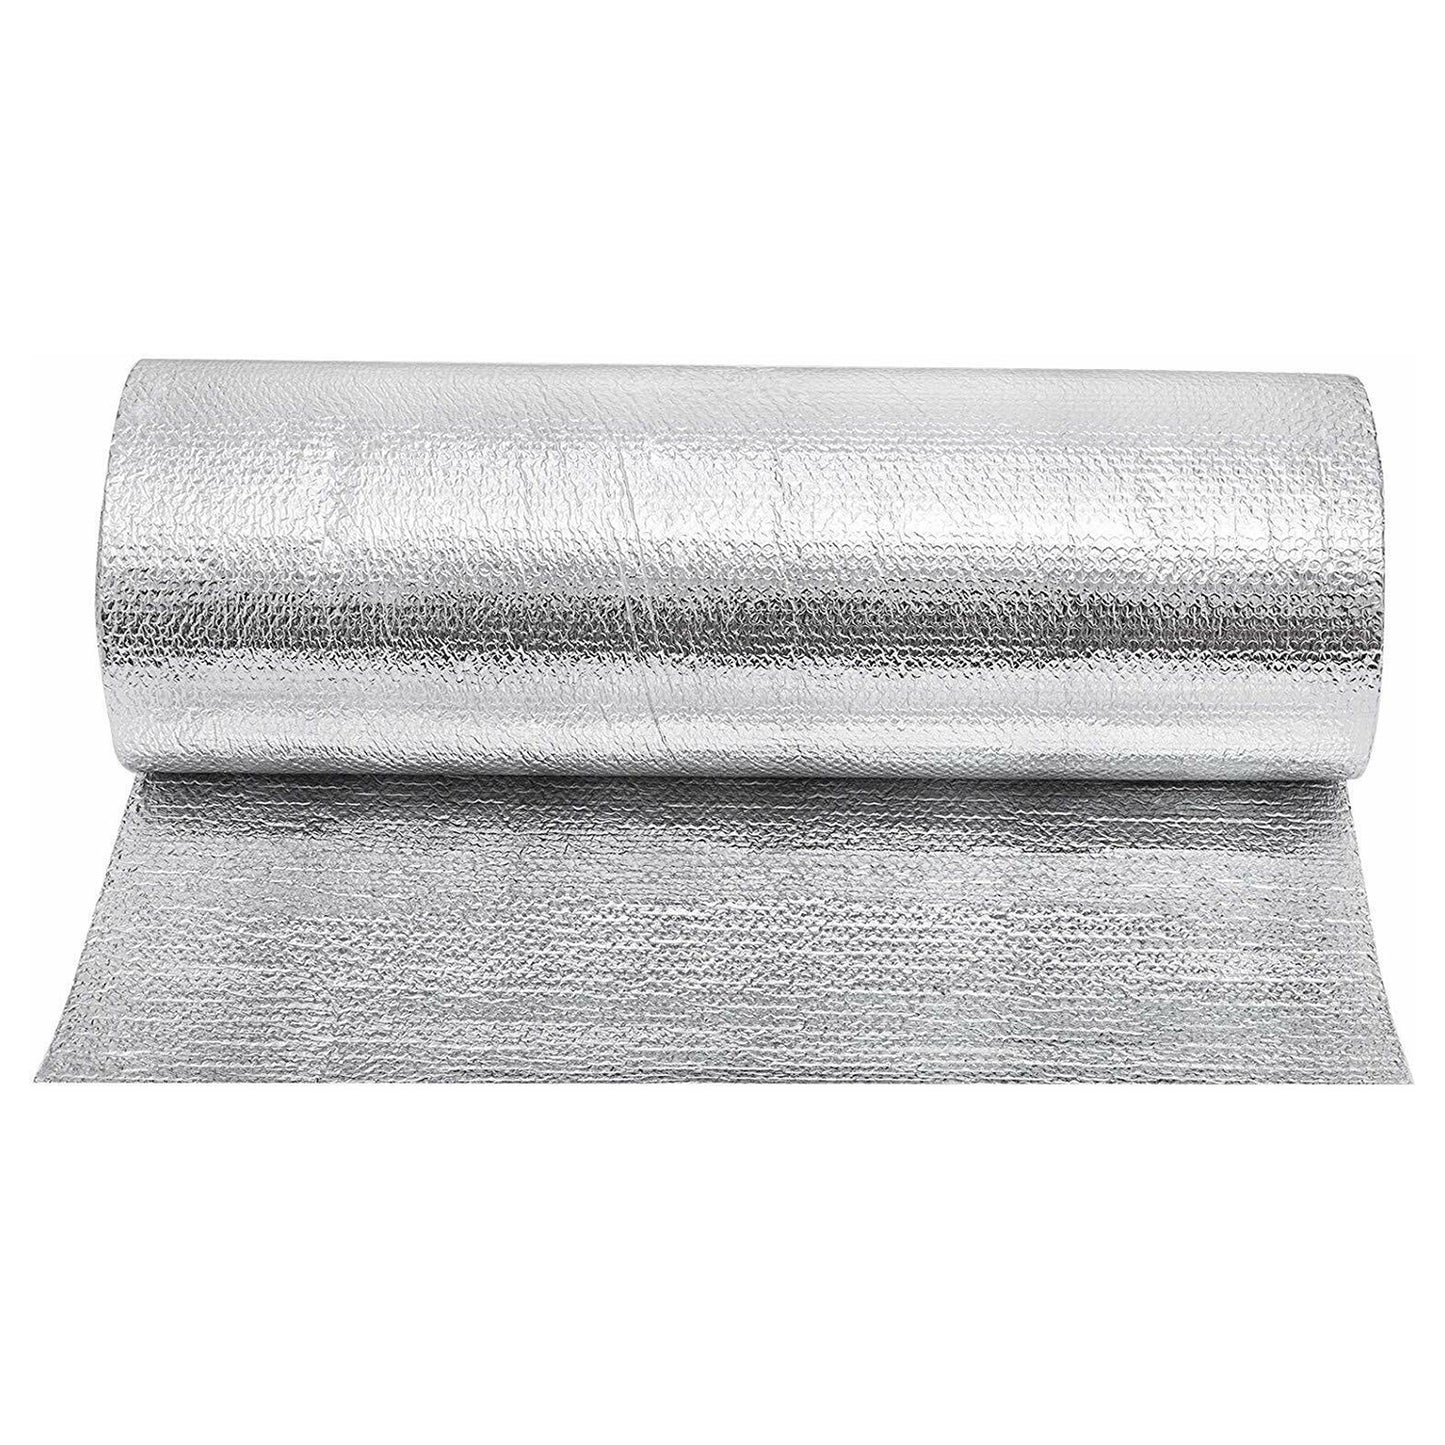 Reflective Foil Insulation 5m Roll